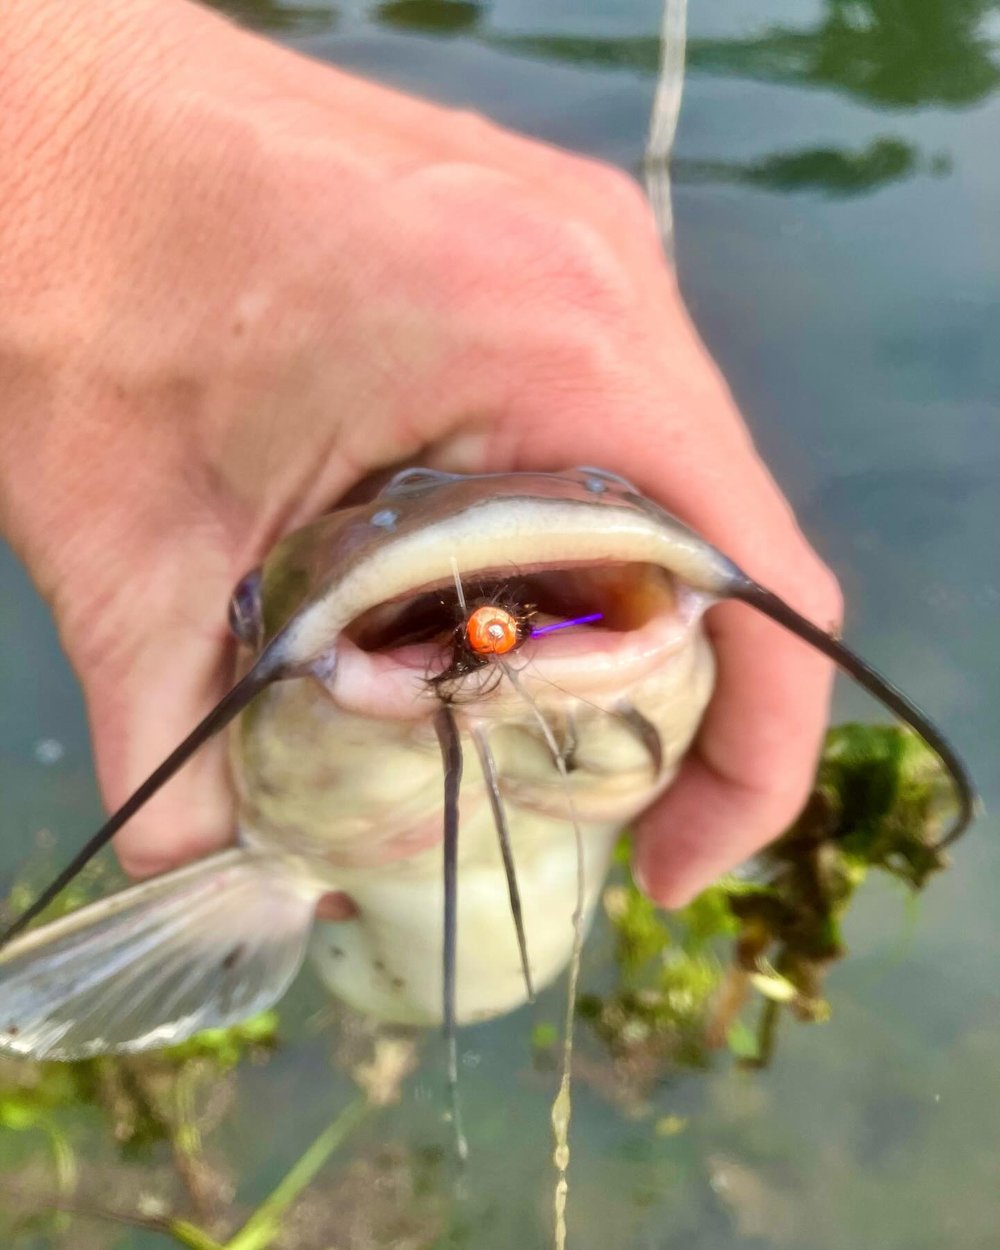 This bass with whiskers struck this balanced leech like freight train. 😉